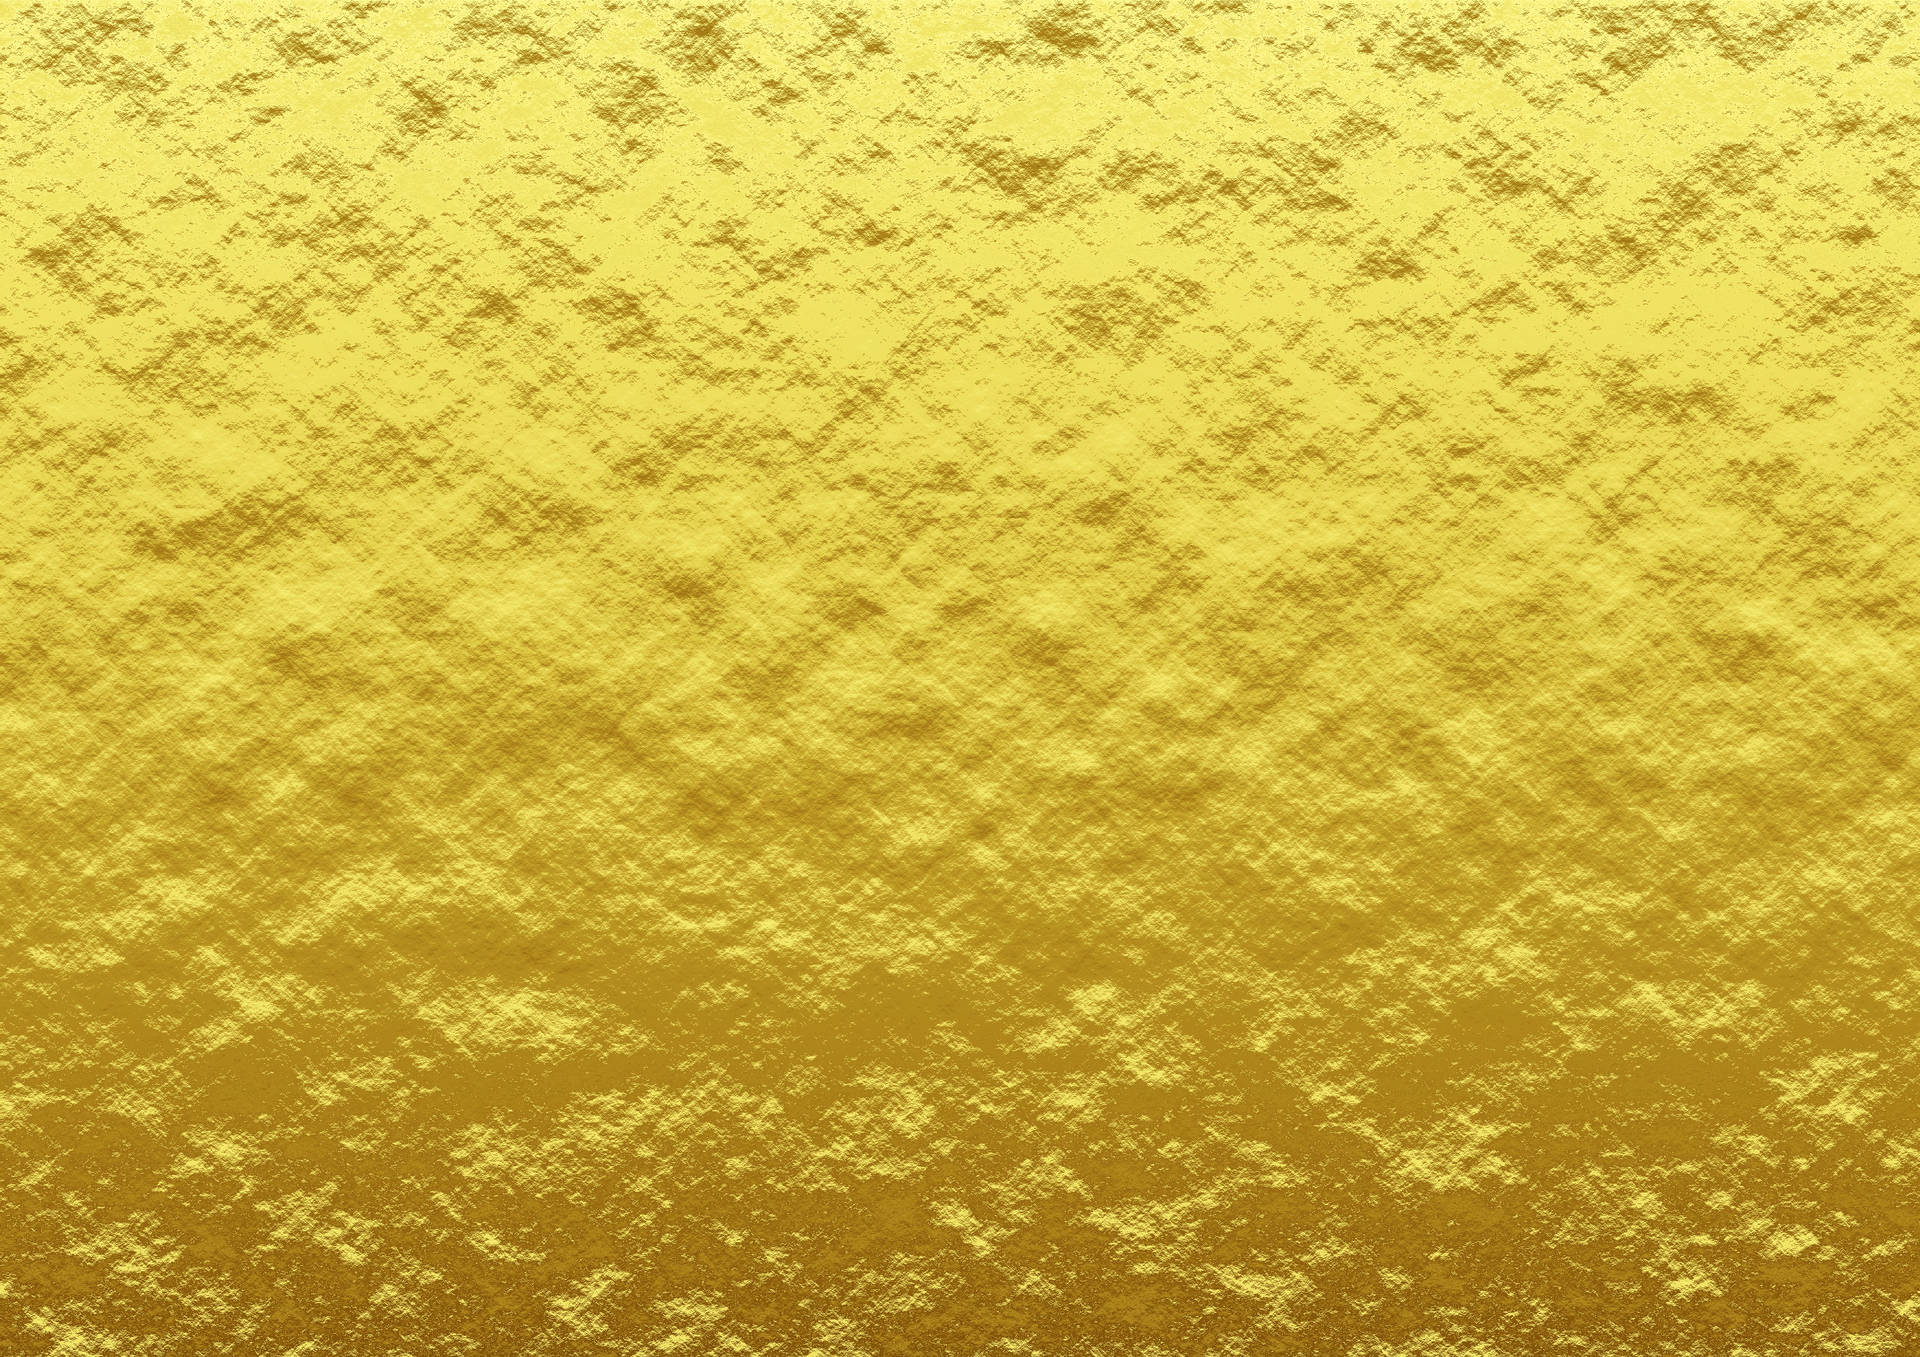 Yellow 3508X2480 Wallpaper and Background Image